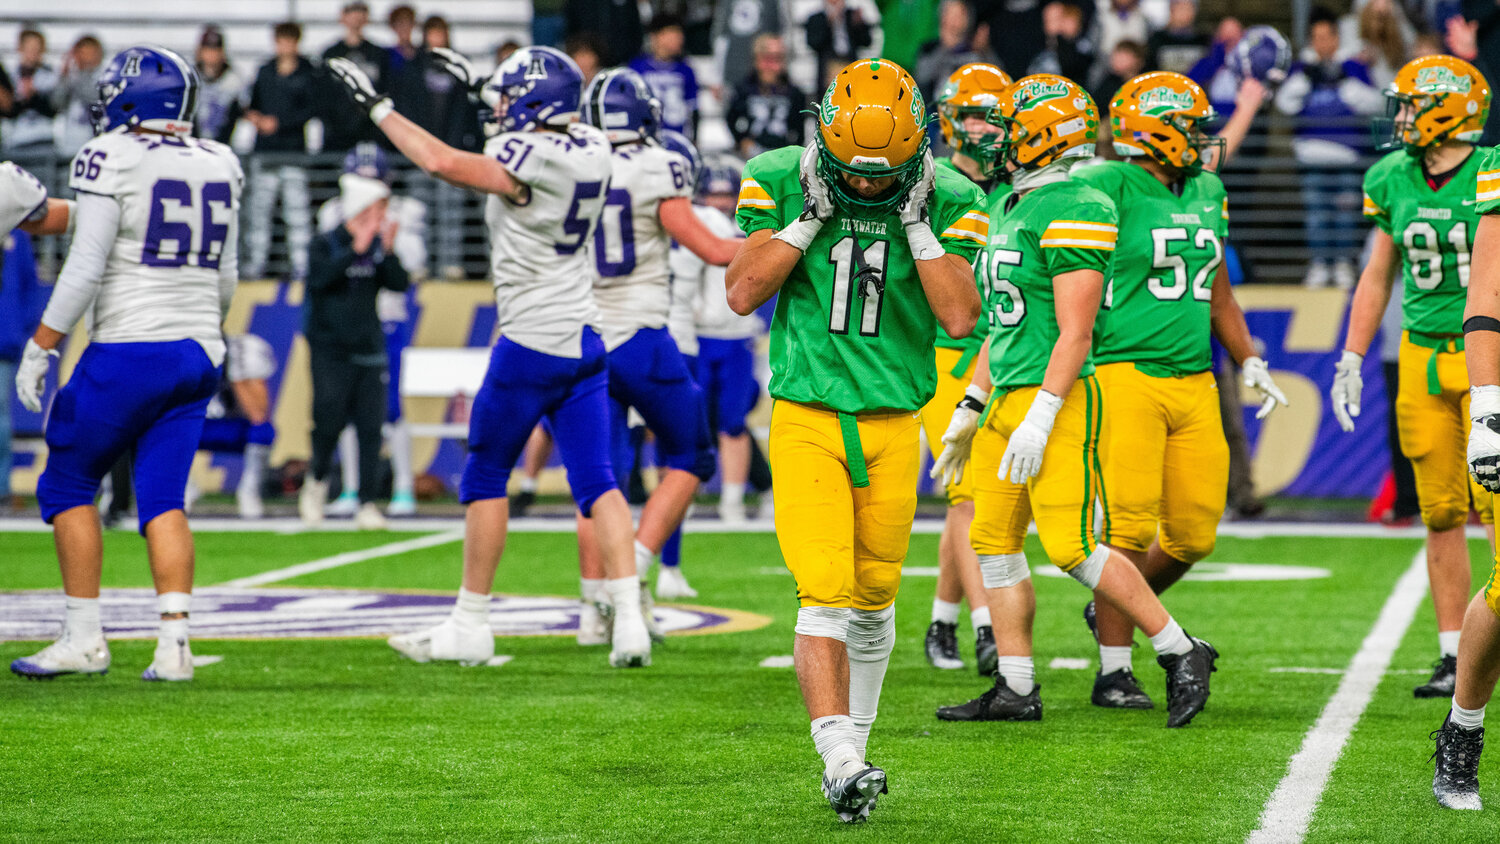 Tumwater’s Payton LaGuerre reacts after a loss to Anacortes in the 2A State Championship game on Saturday, Dec. 2 at Husky Stadium.